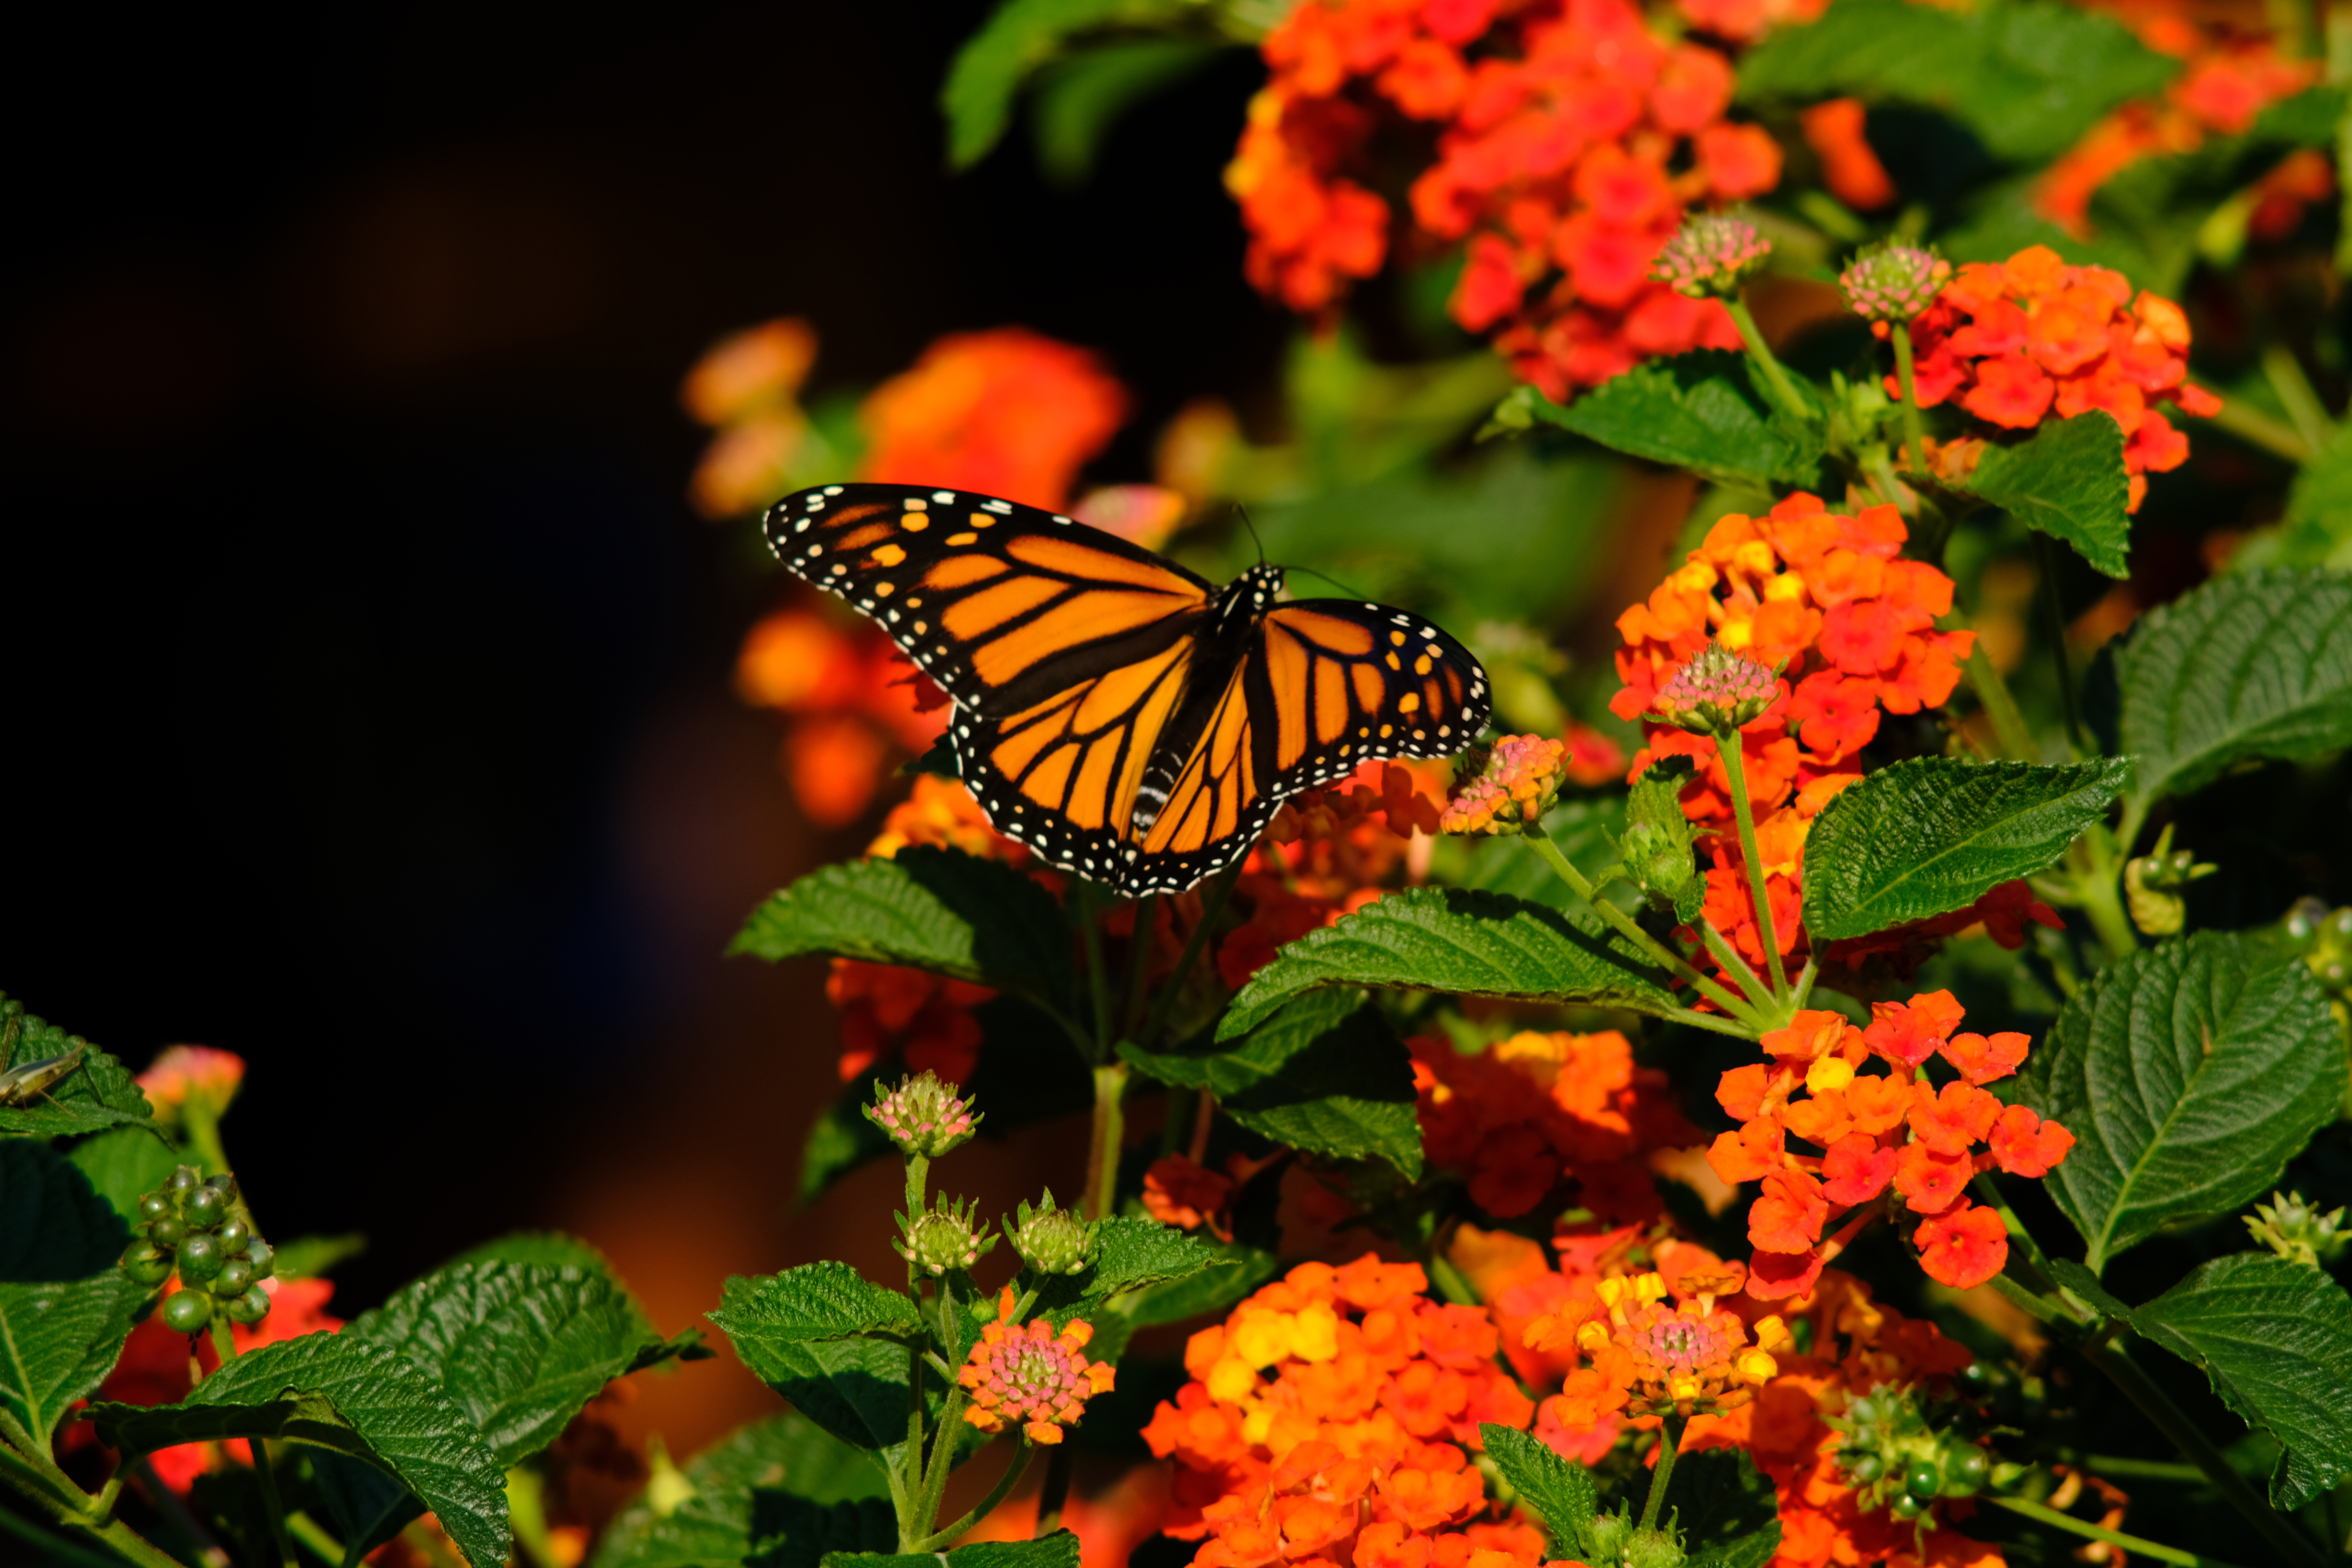 146348 free wallpaper 320x480 for phone, download images animals, flowers, butterfly monarch, wings 320x480 for mobile